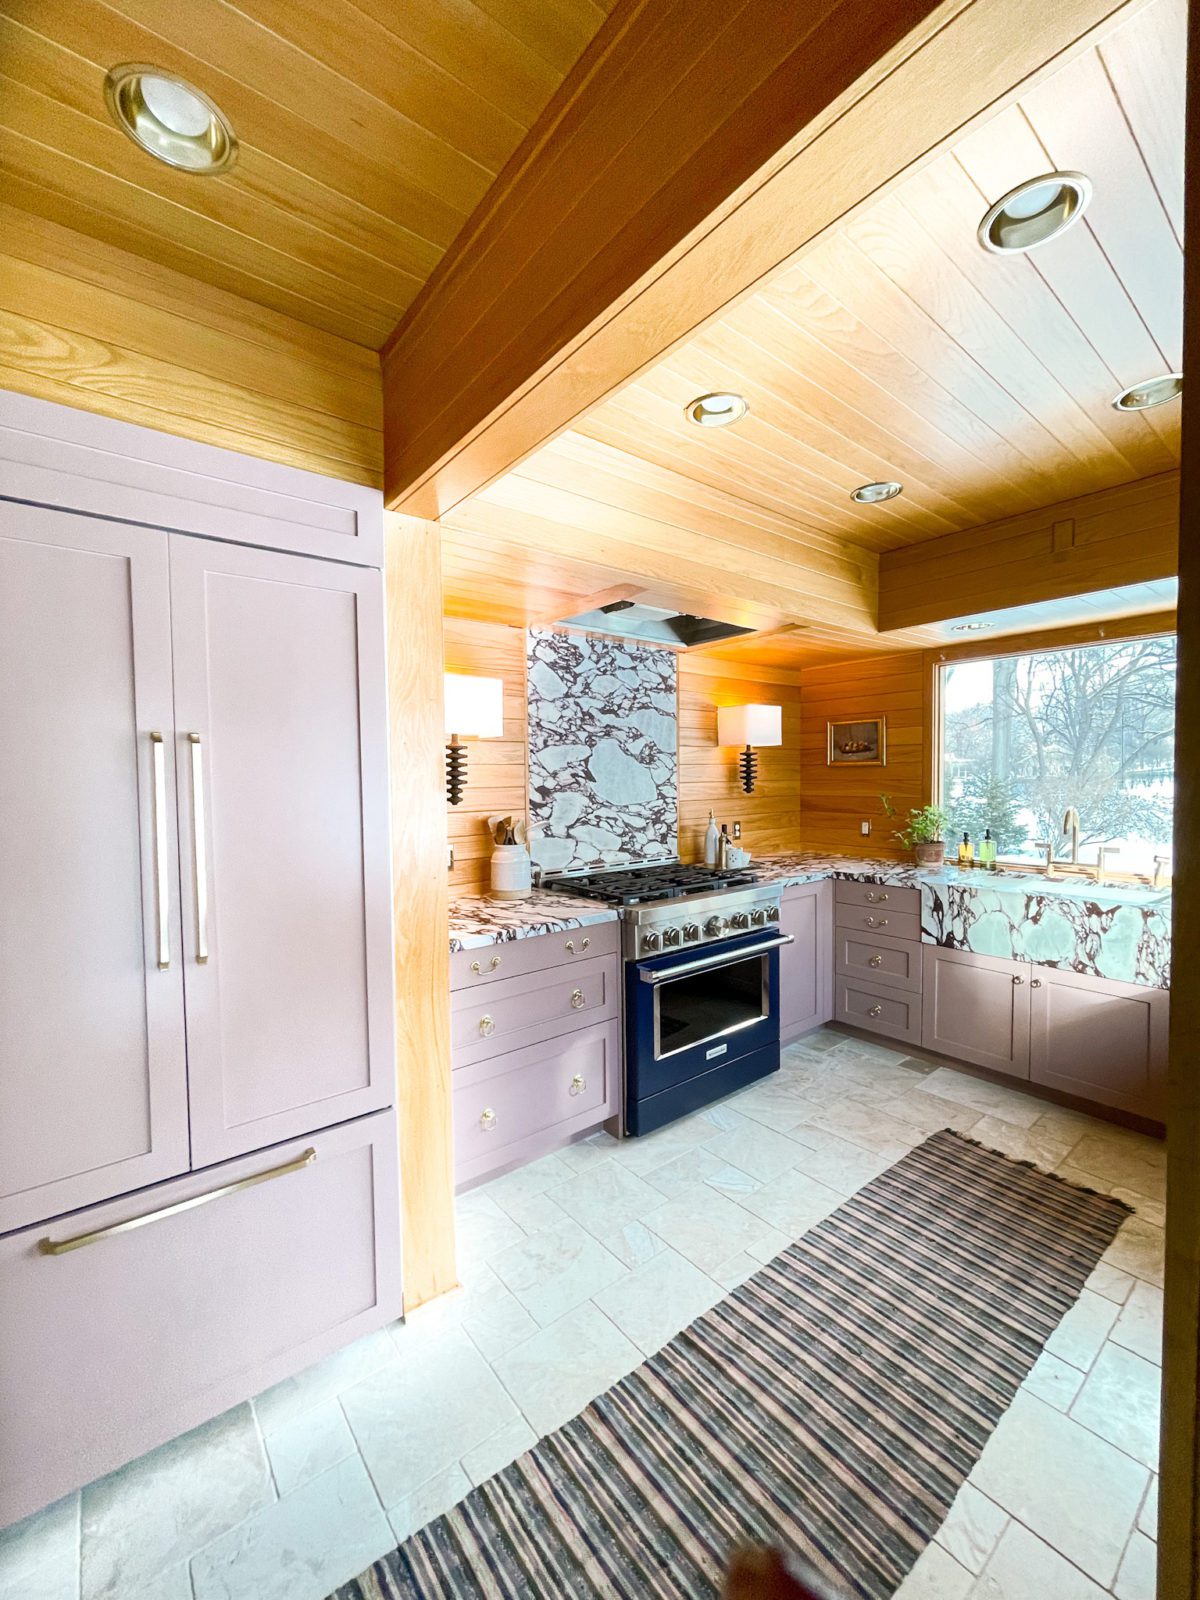 A blue oven in a kitchen. Kitchen has pink cabinets and white marble floors. 